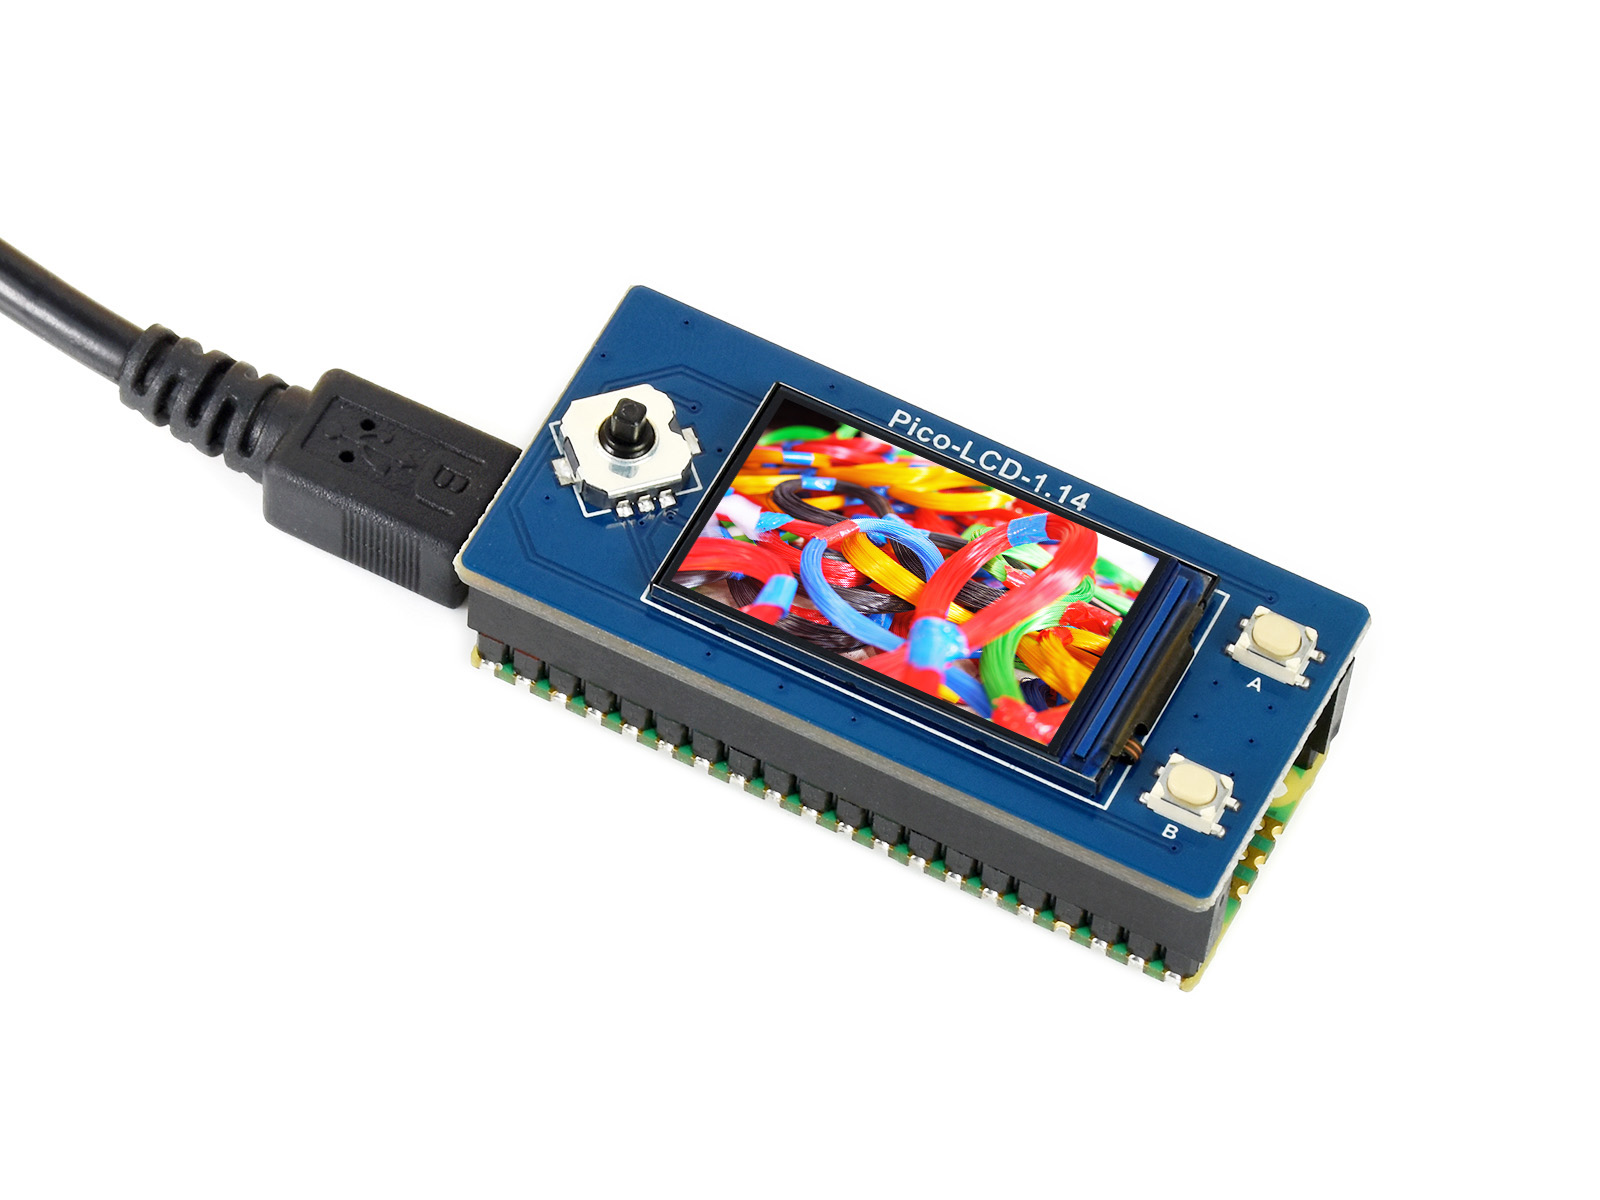 1.14inch LCD Display Module for Raspberry Pi Pico, 65K Colors, 240*135, SPI